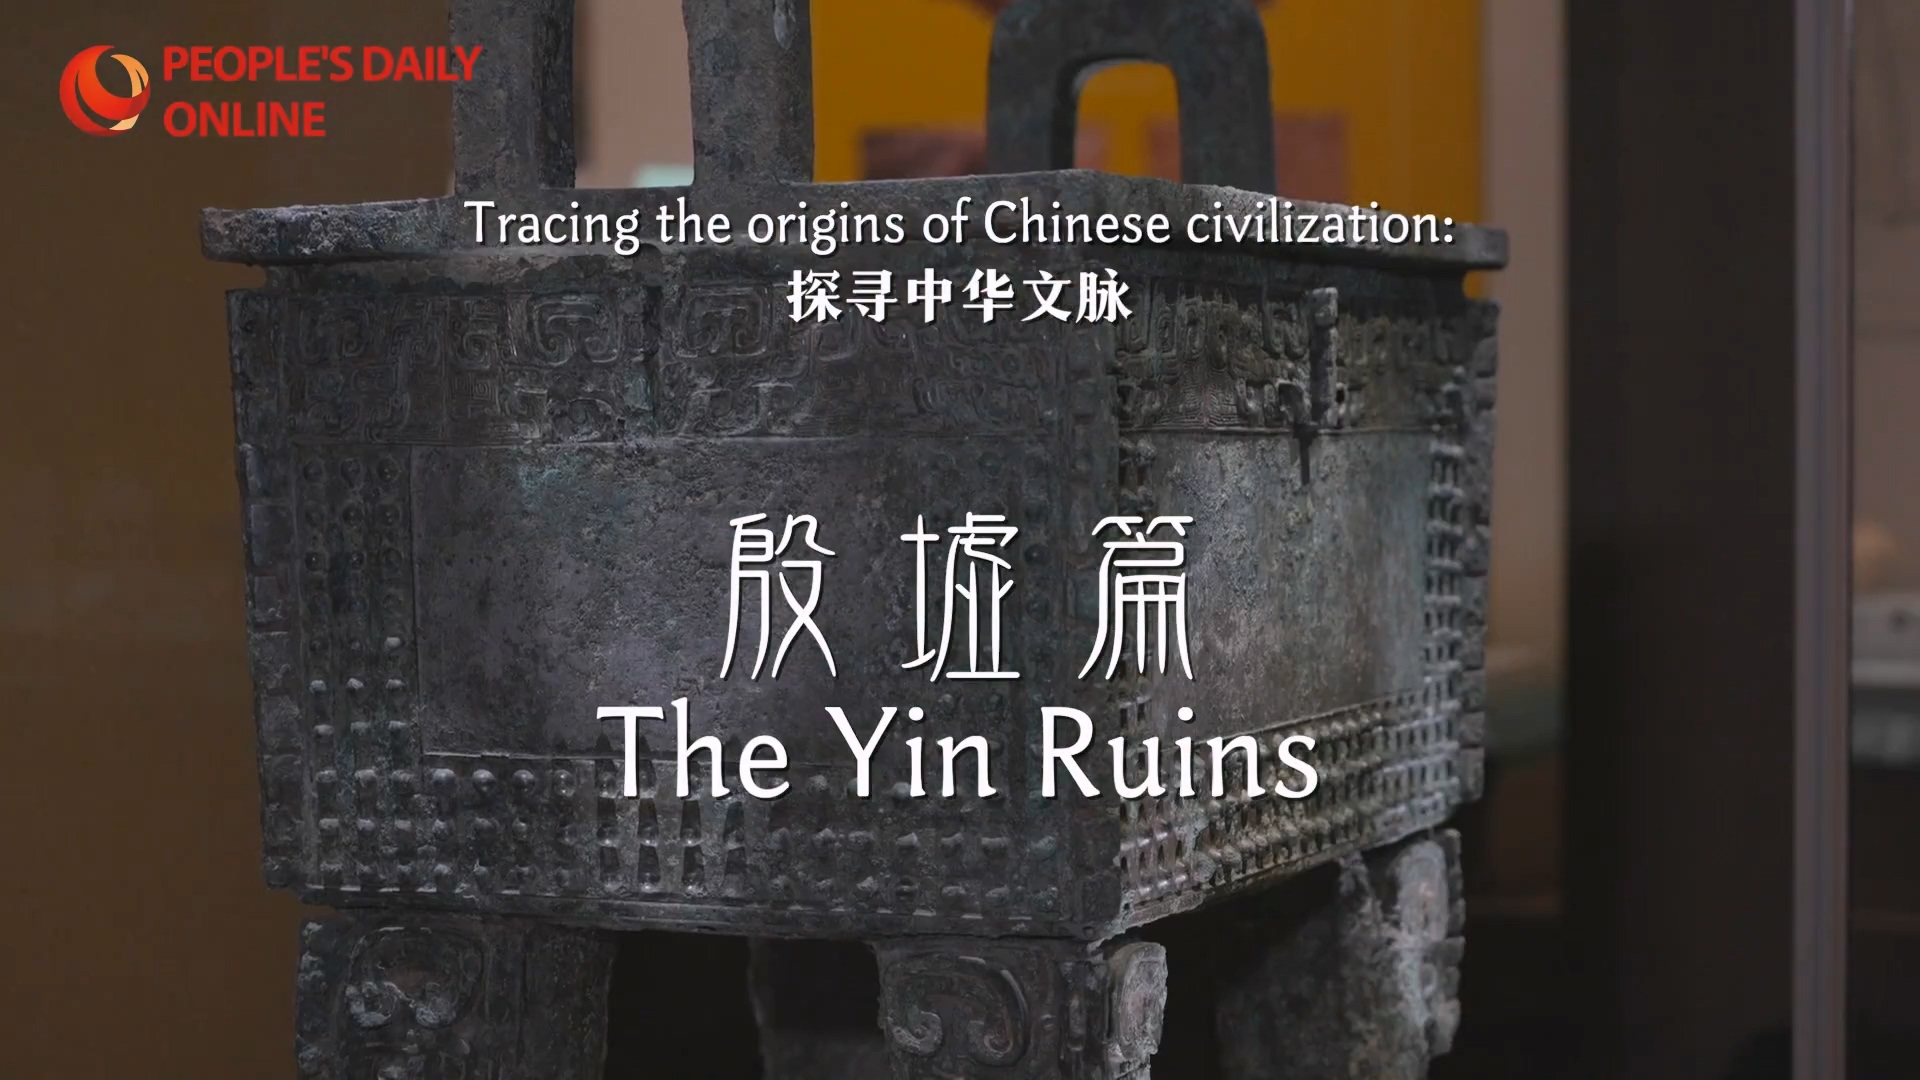 Yin Ruins shed new light on 3000-year-old civilization in C China's Henan